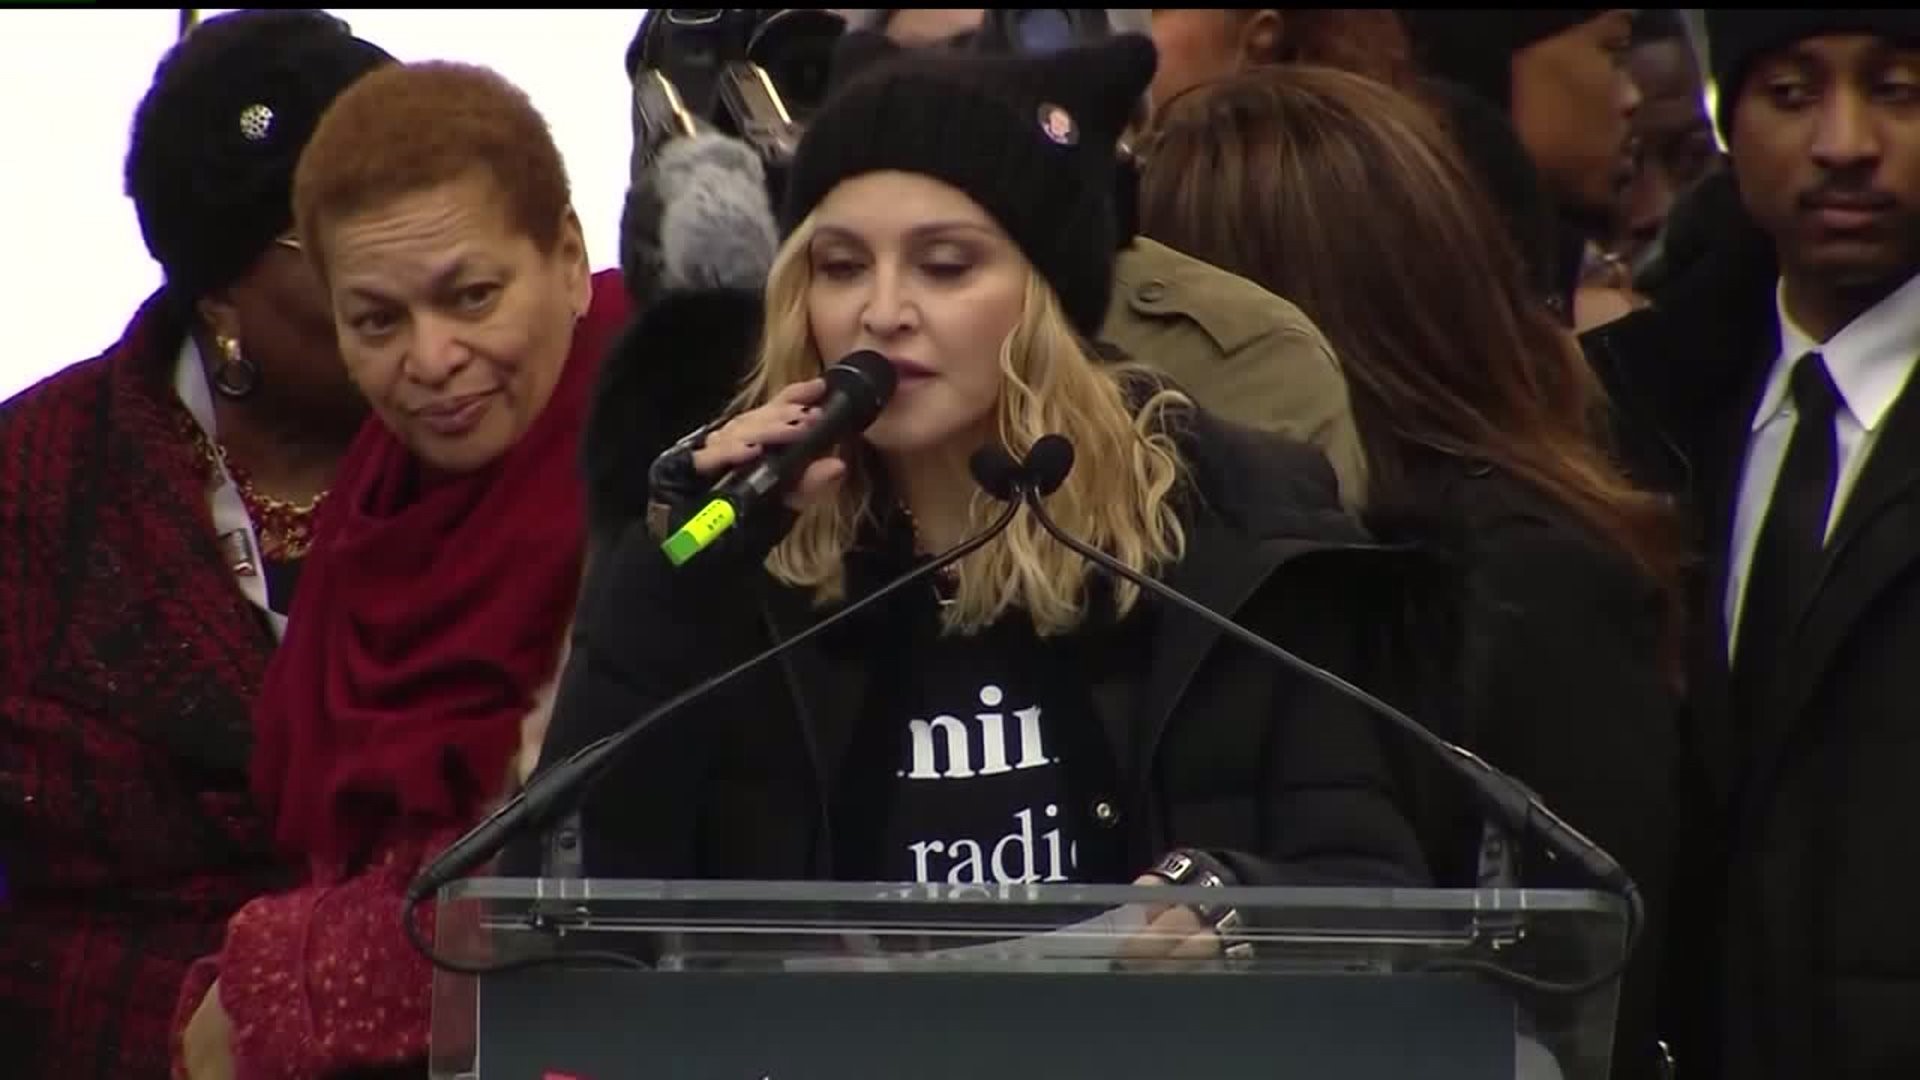 Man sues Madonna, saying concert start is too late